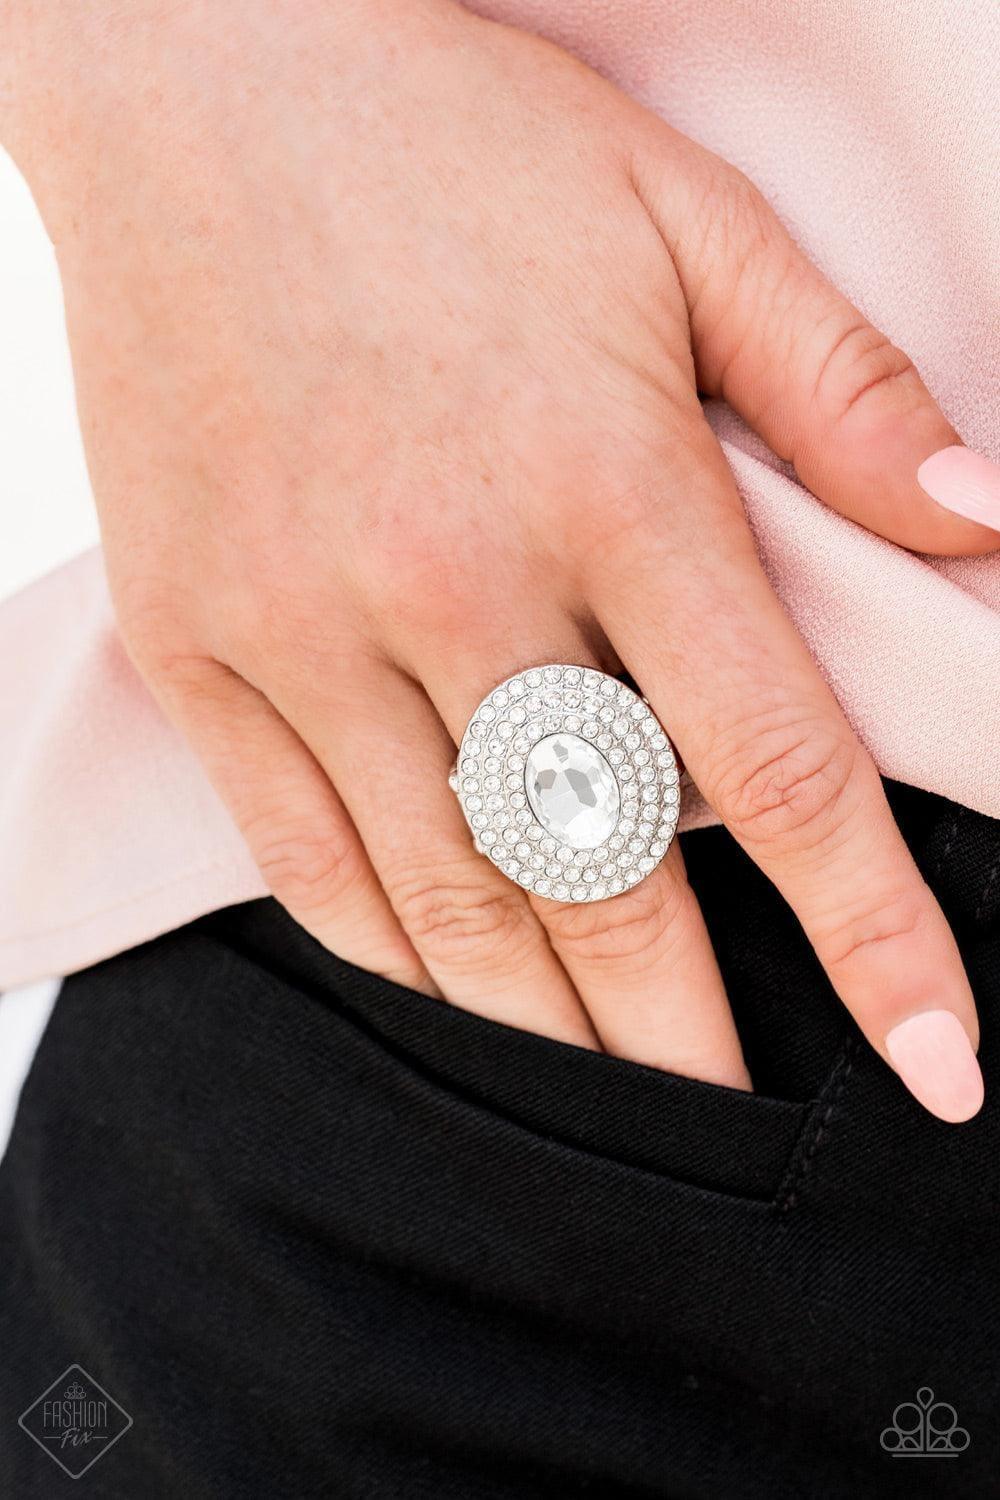 Paparazzi Accessories - Metro Millionaire - Silver Ring - Bling by JessieK